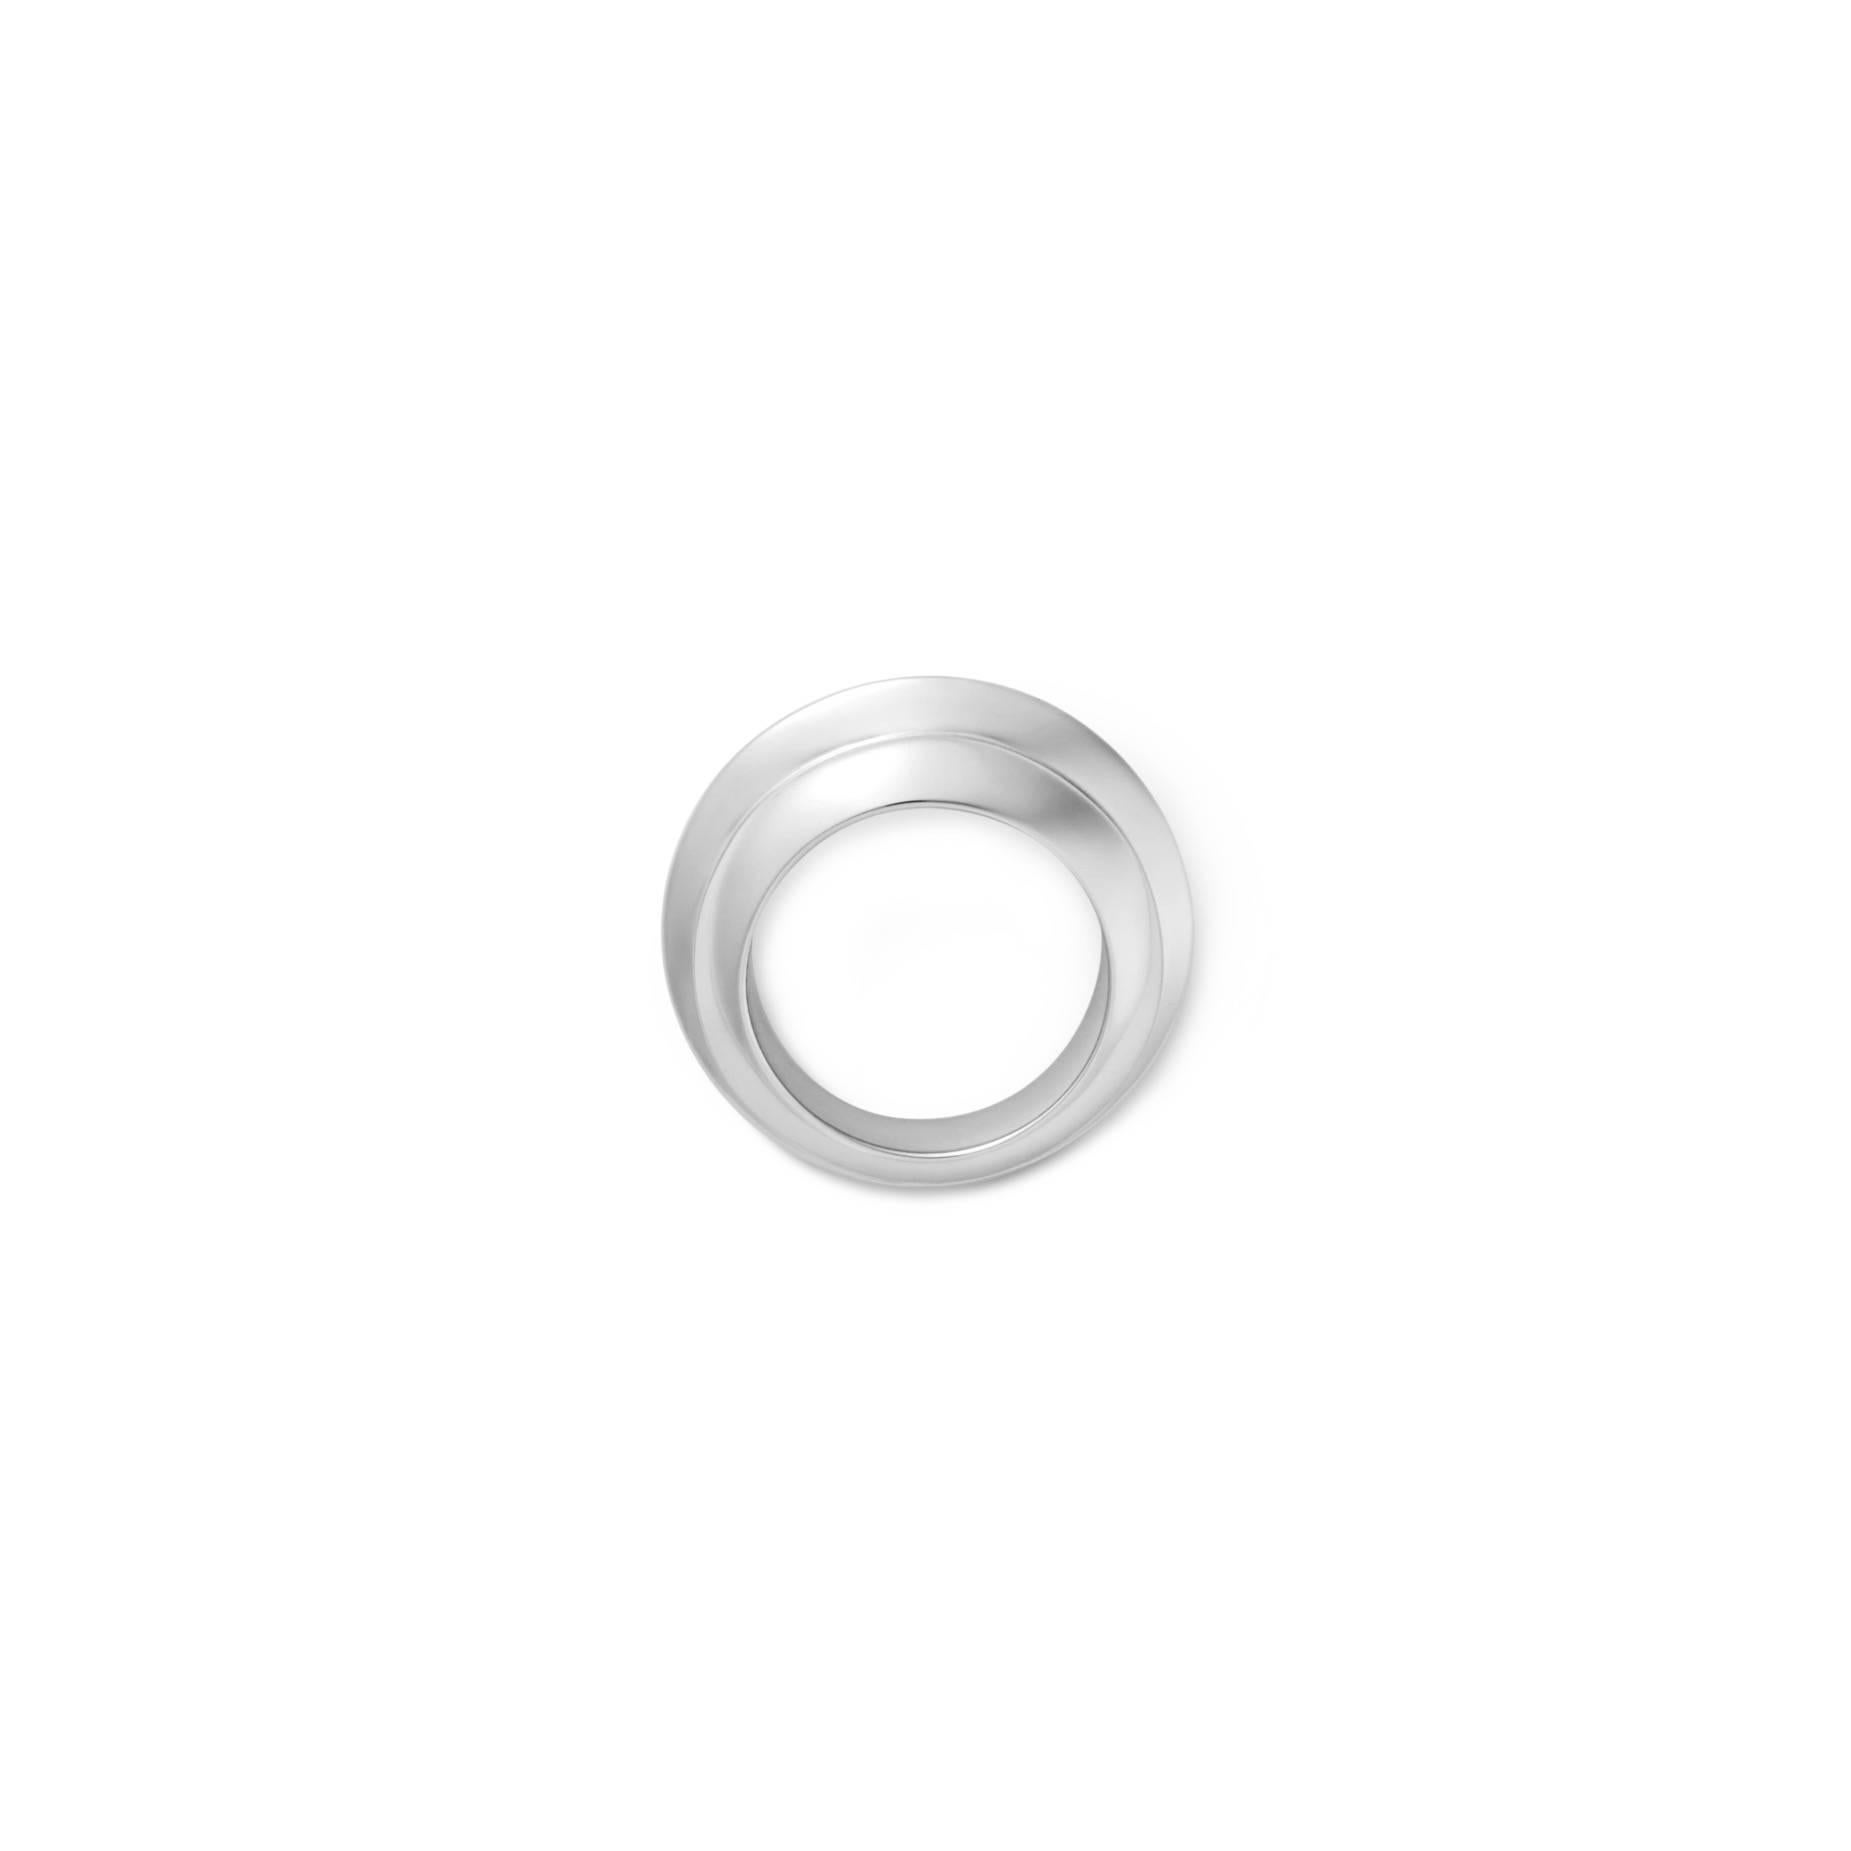 Strong sleek and minimalist design our Sterling Silver Gravity ring is made from sterling silver and has a high finishing. A ring that makes a impact.  Several sizes available.